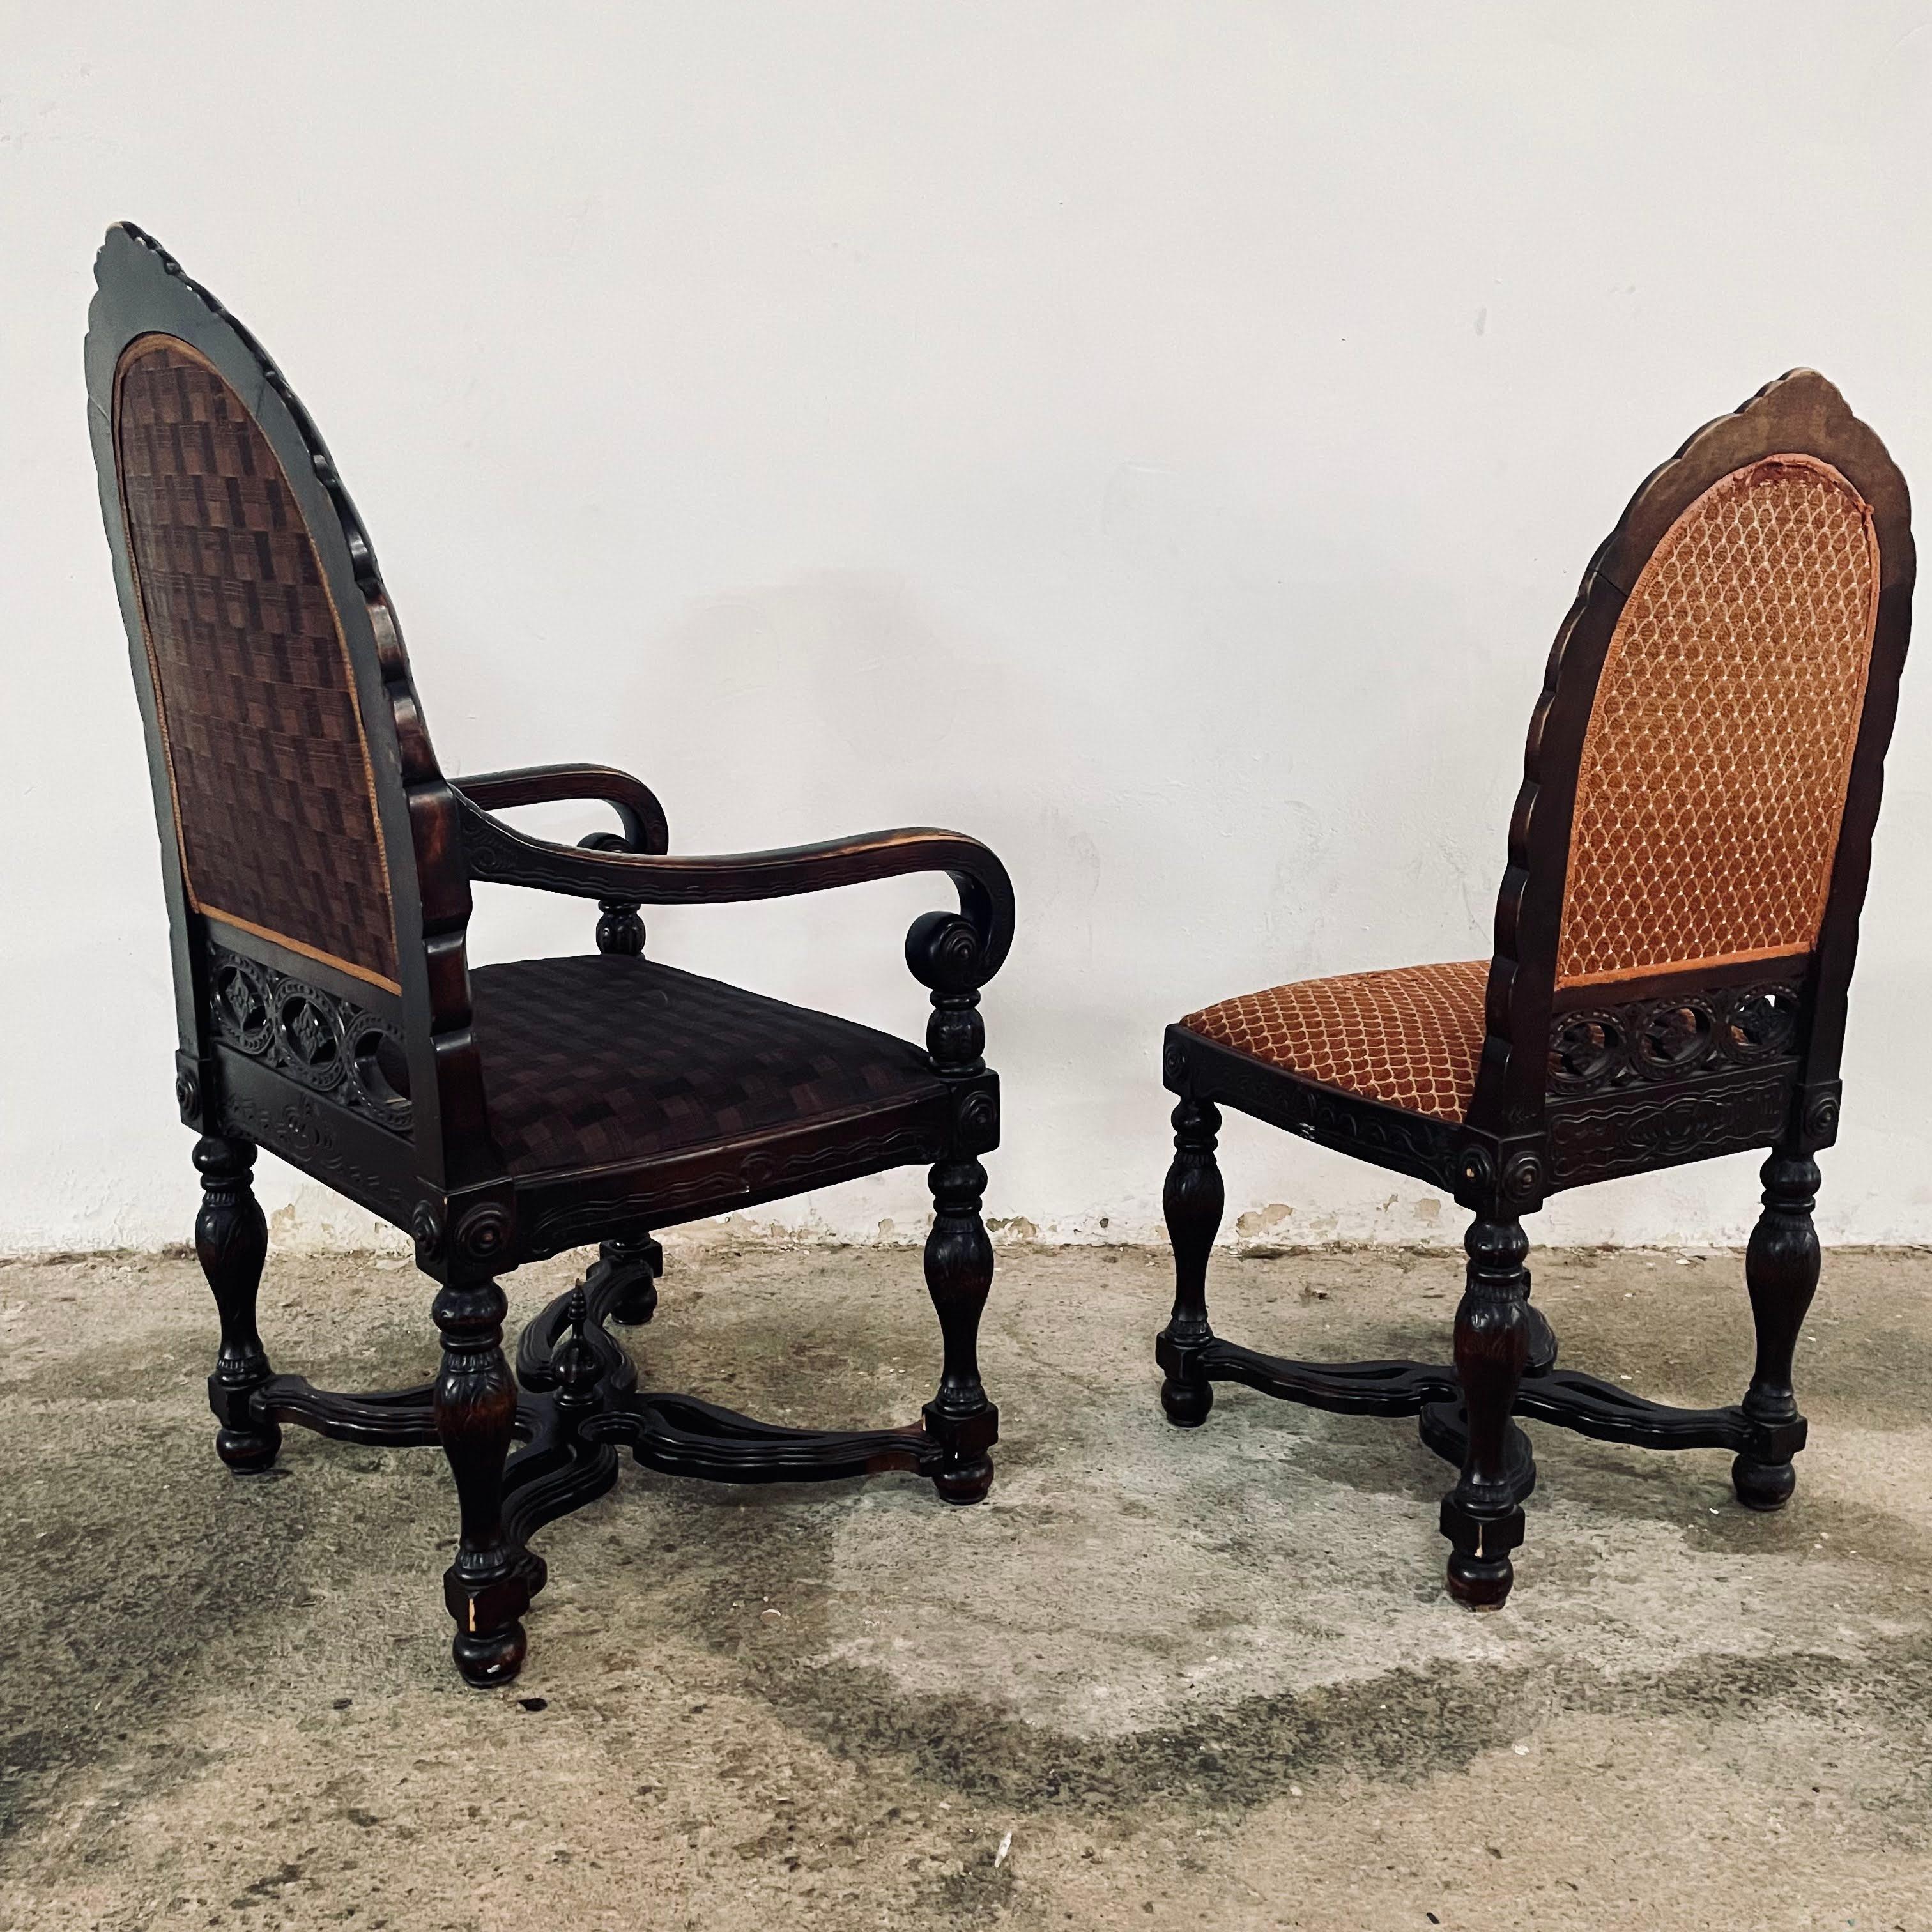 19th Century Pair of Victorian Parlour Chairs, His and Hers Arm Chairs, Netherlands, 1800s For Sale